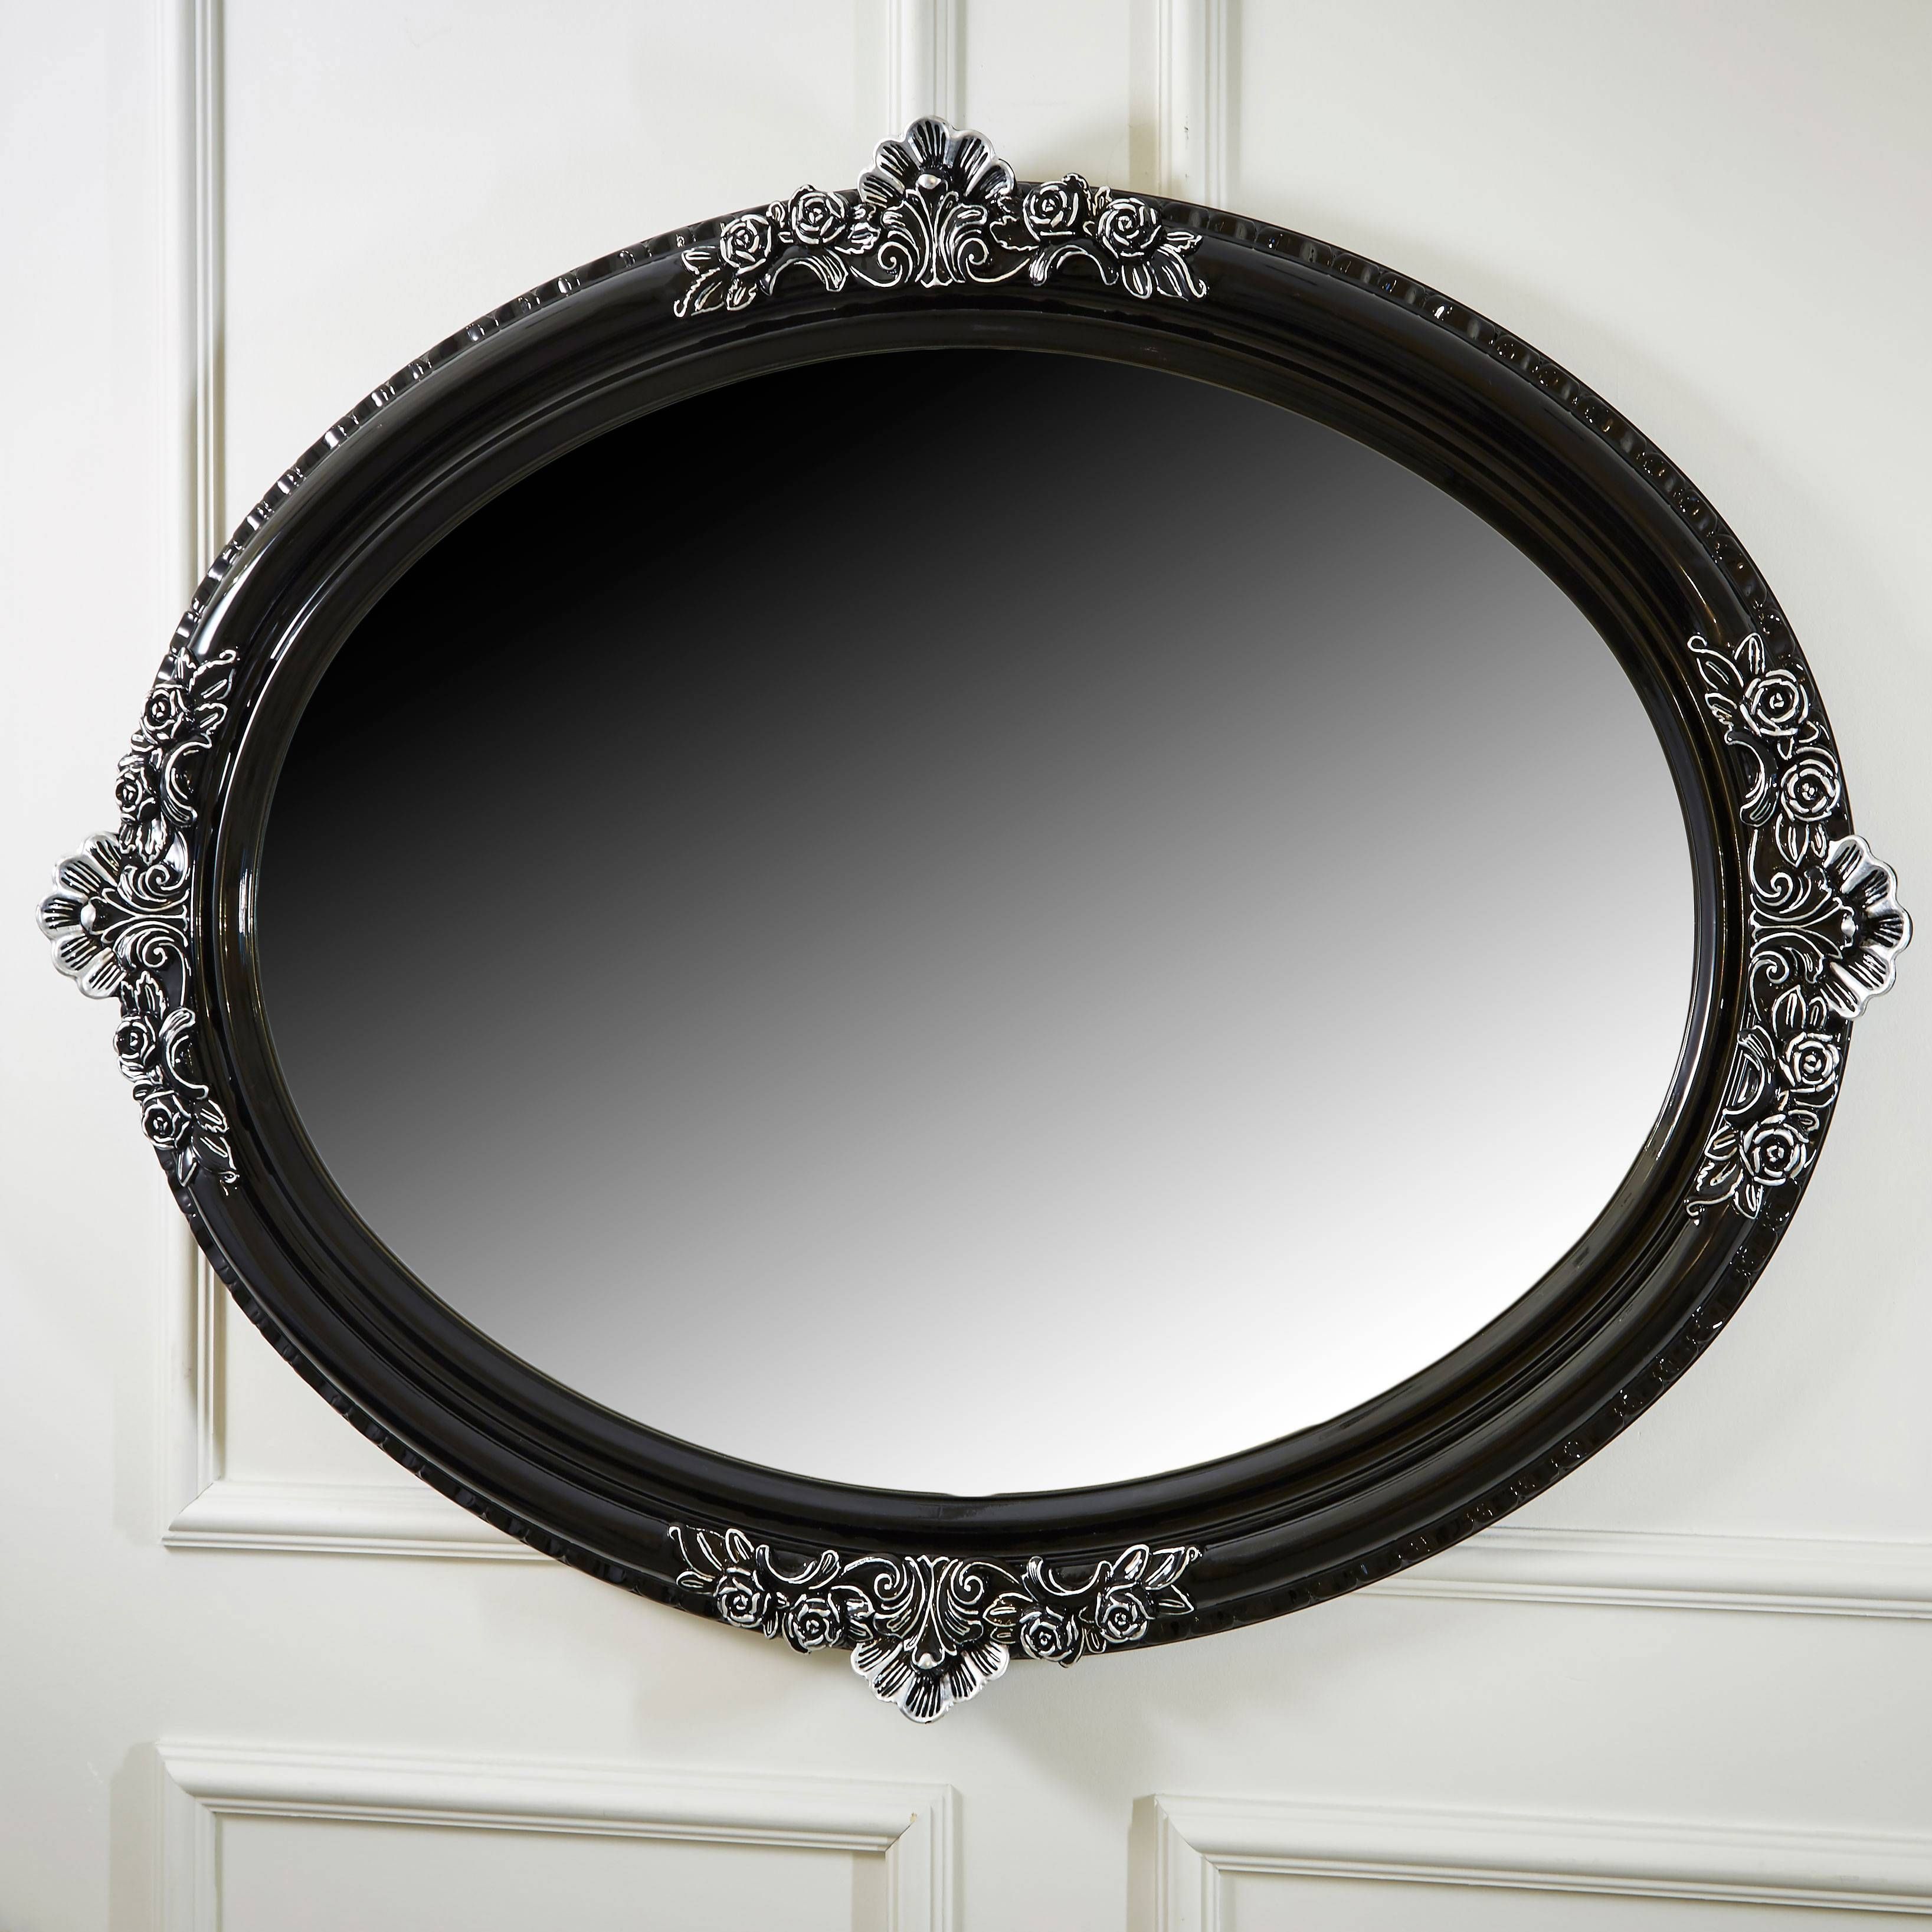 Ornate High Gloss Black Oval Mirror | Juliettes Interiors Intended For Ornate Black Mirrors (View 11 of 15)